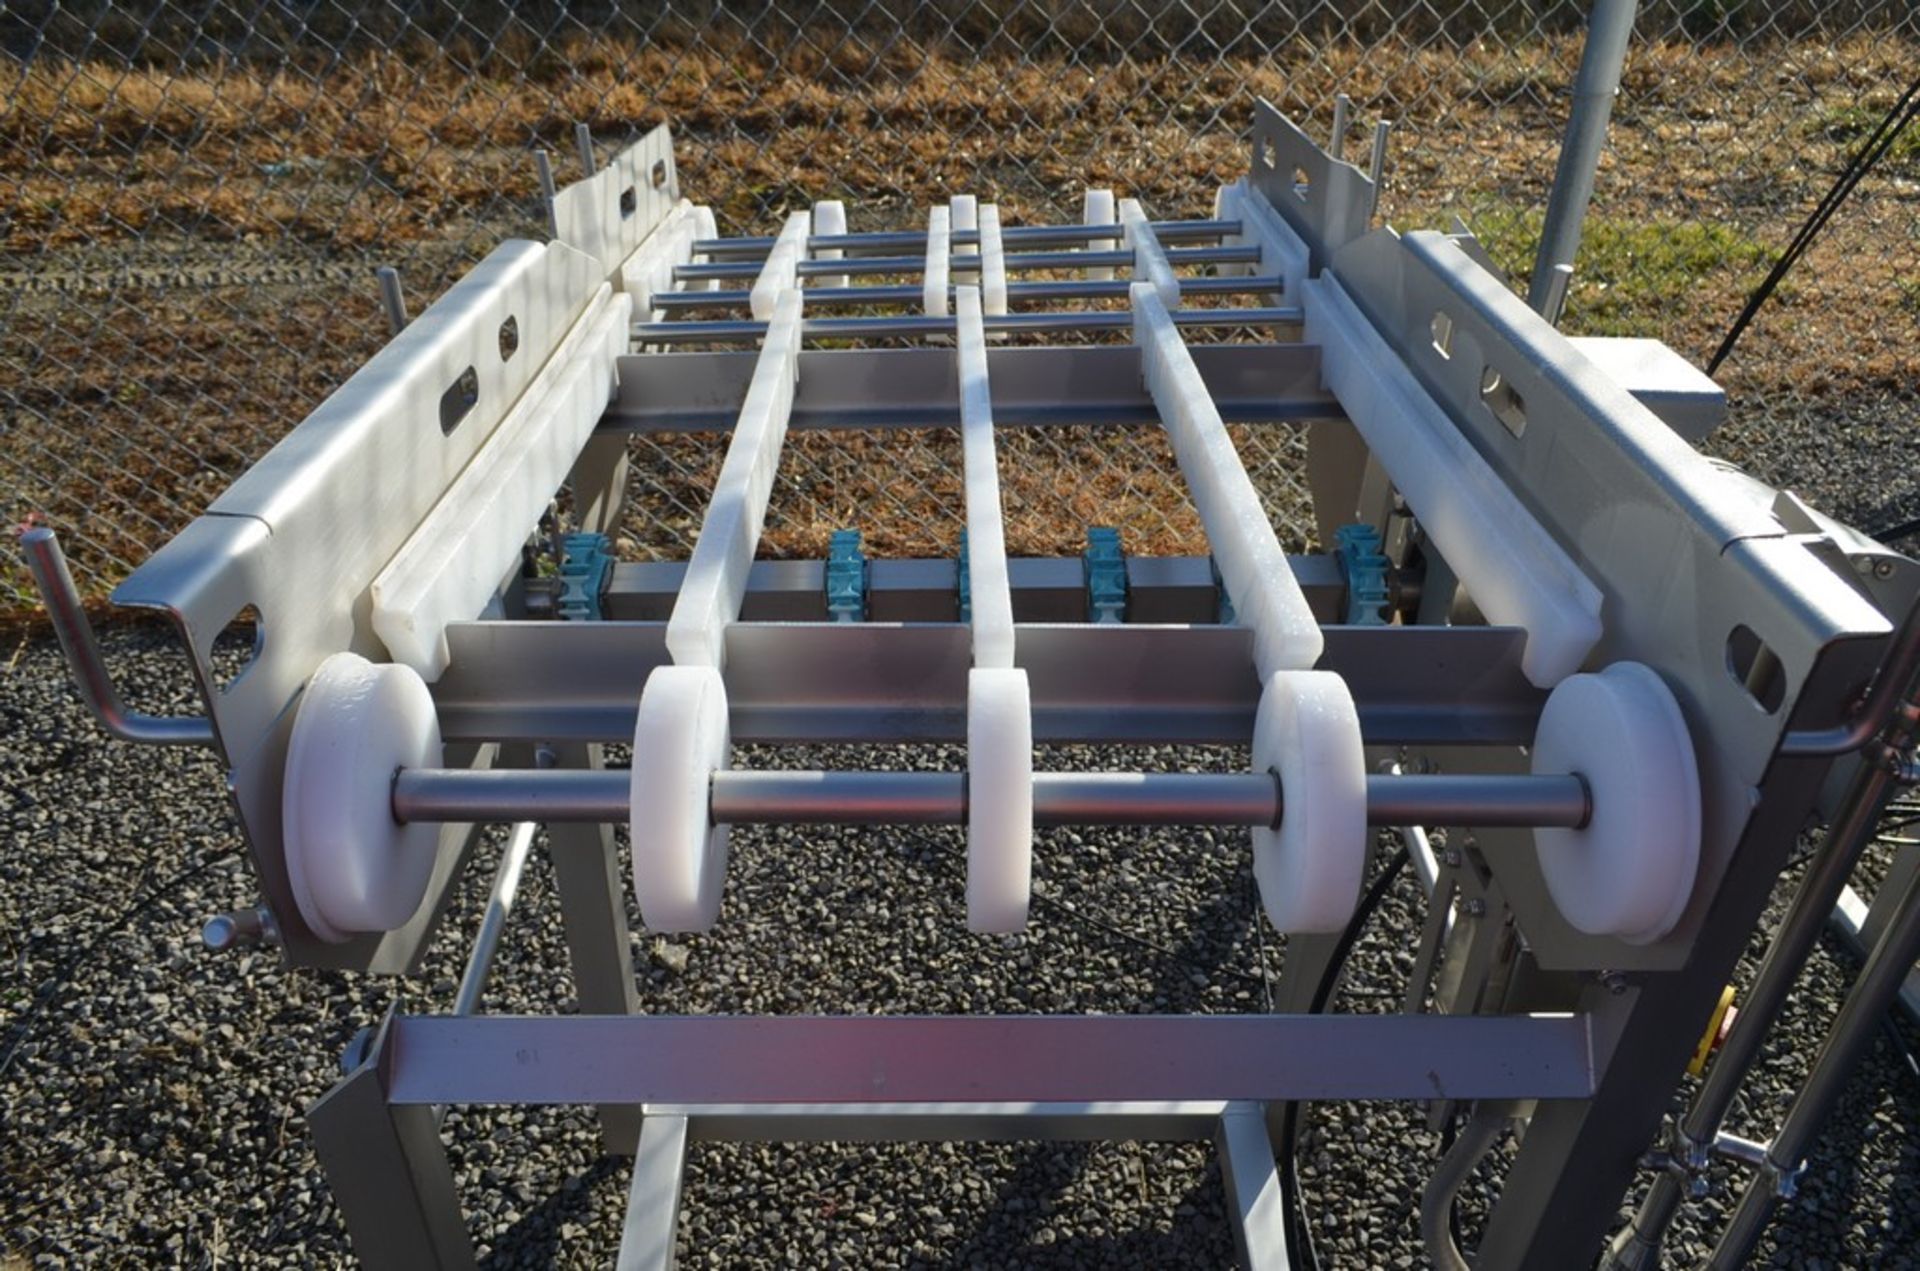 4ft. Long X 24in Wide S/S Conveyor Frame with S/S Motor (No Belt) - Image 2 of 3